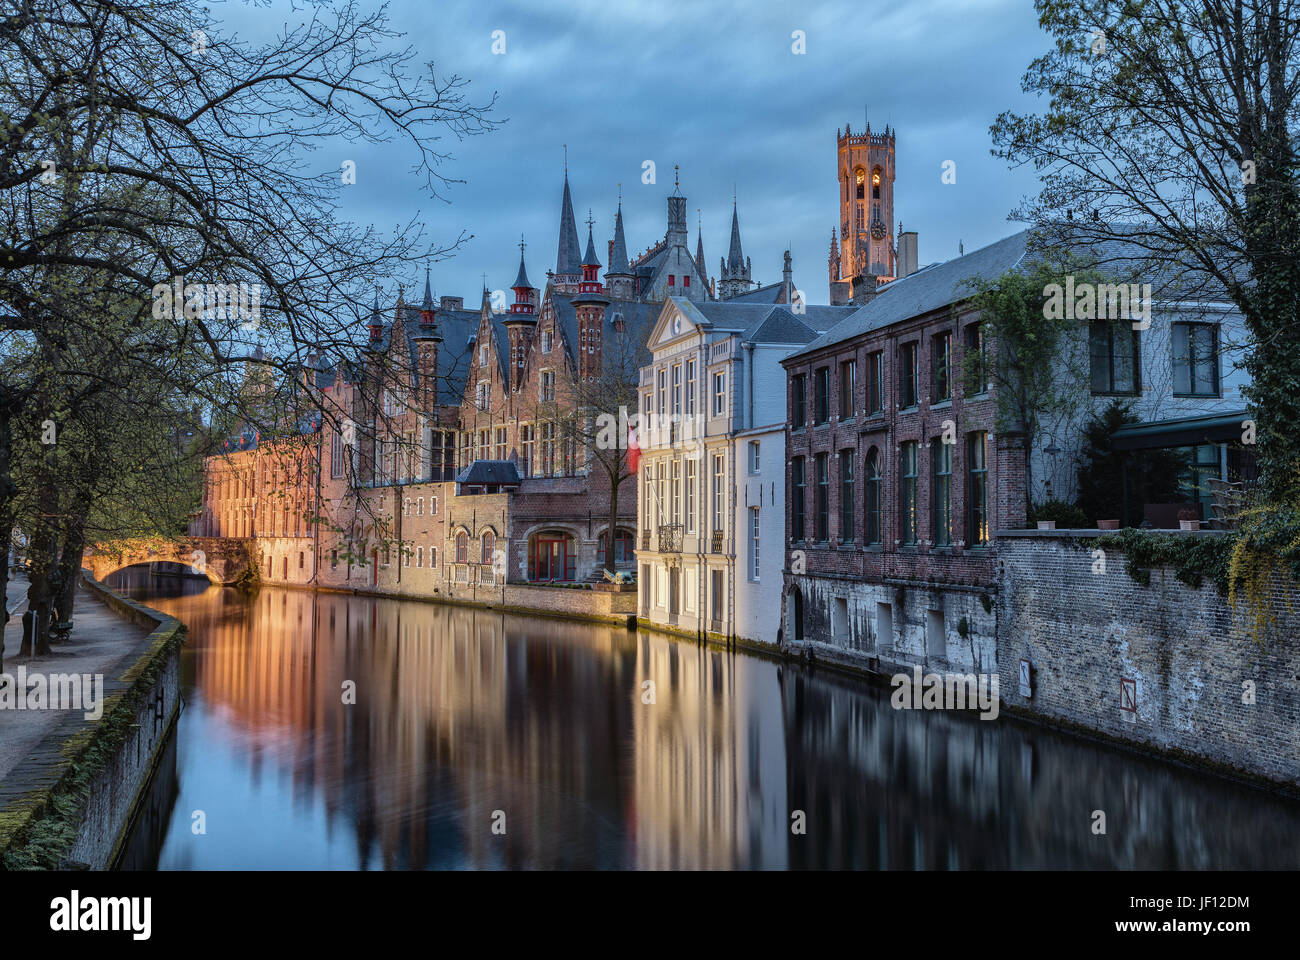 Brugge the romantic city at evening Stock Photo